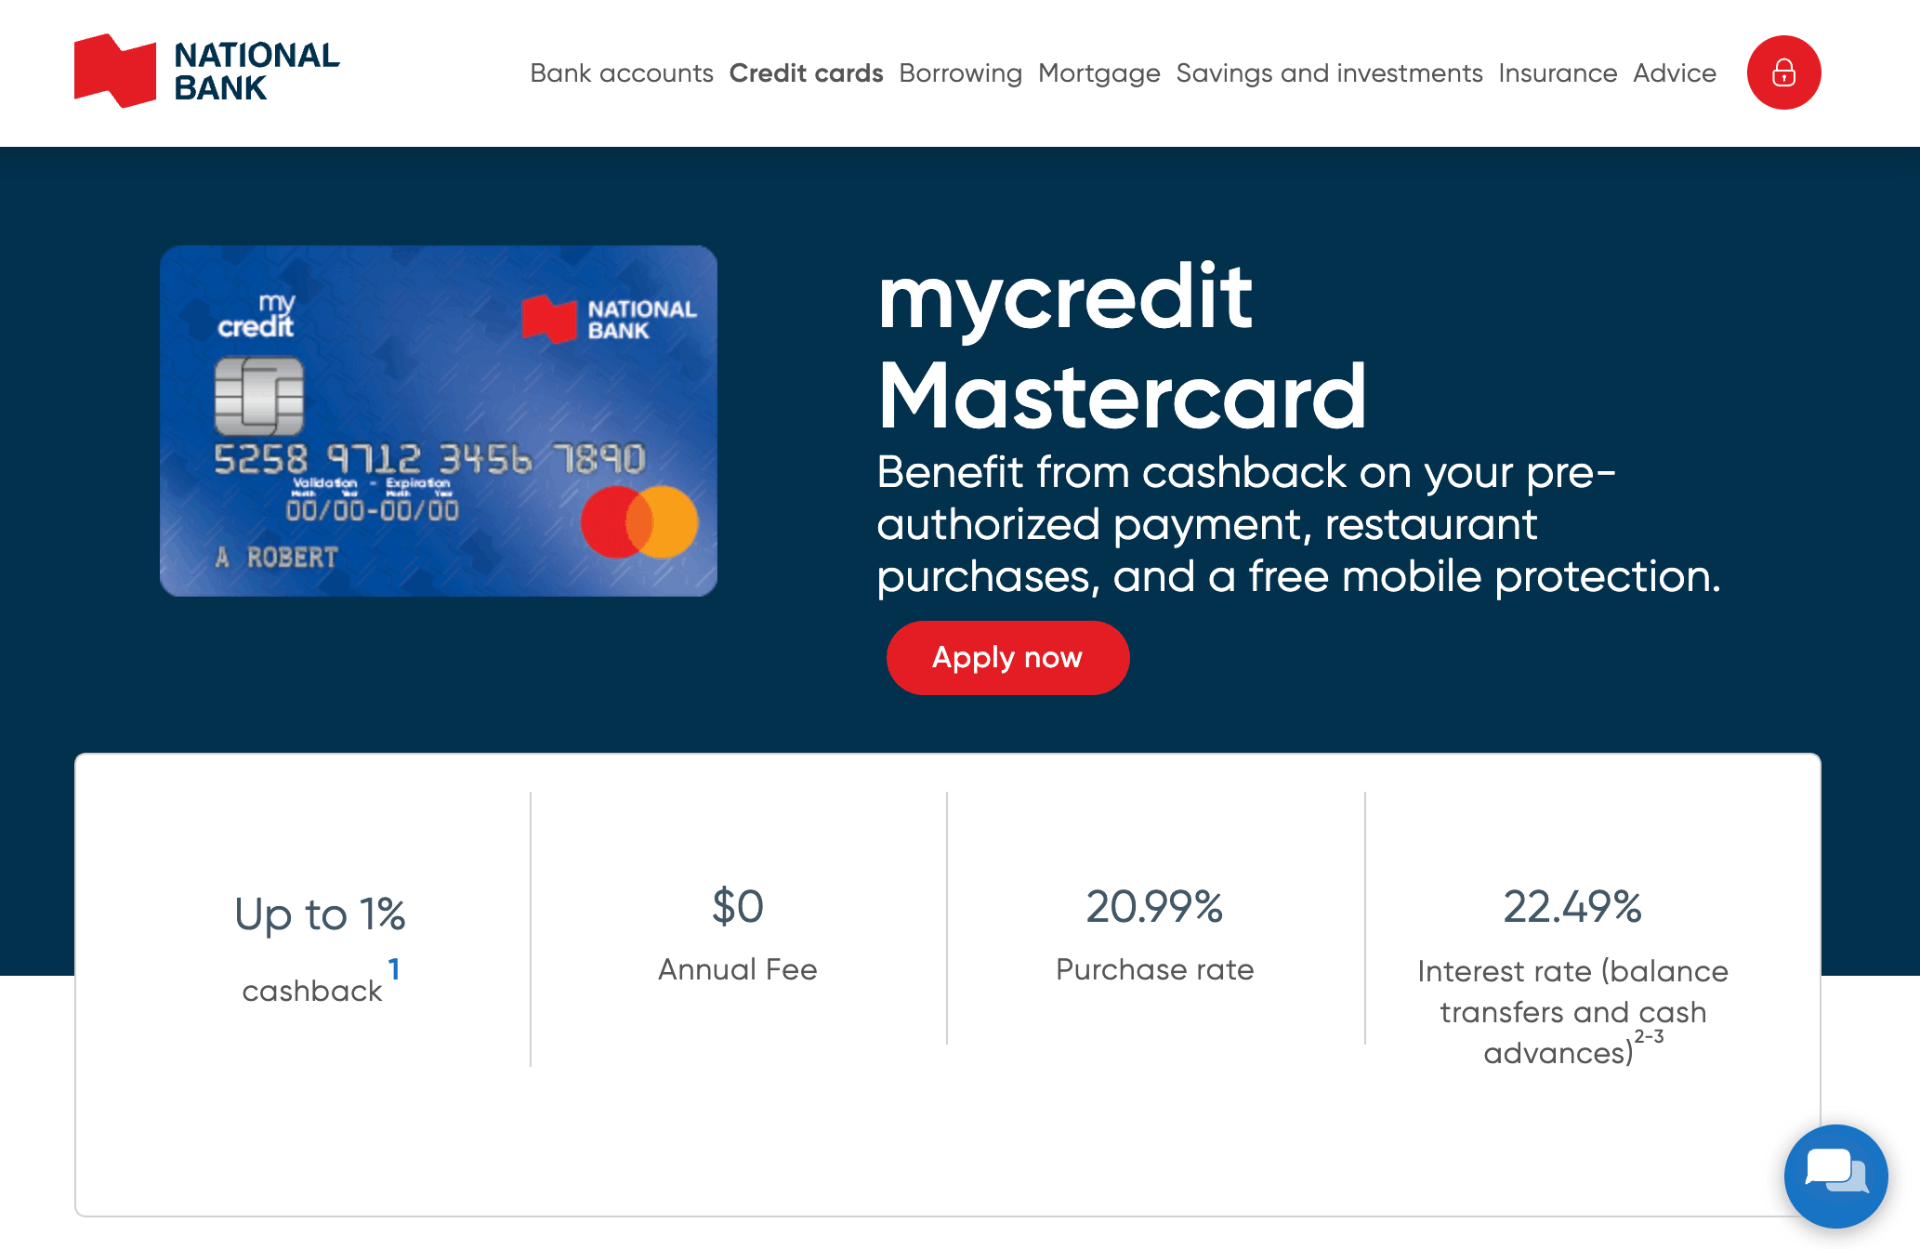 NBC My Credit - Learn How to Apply for a Credit Card